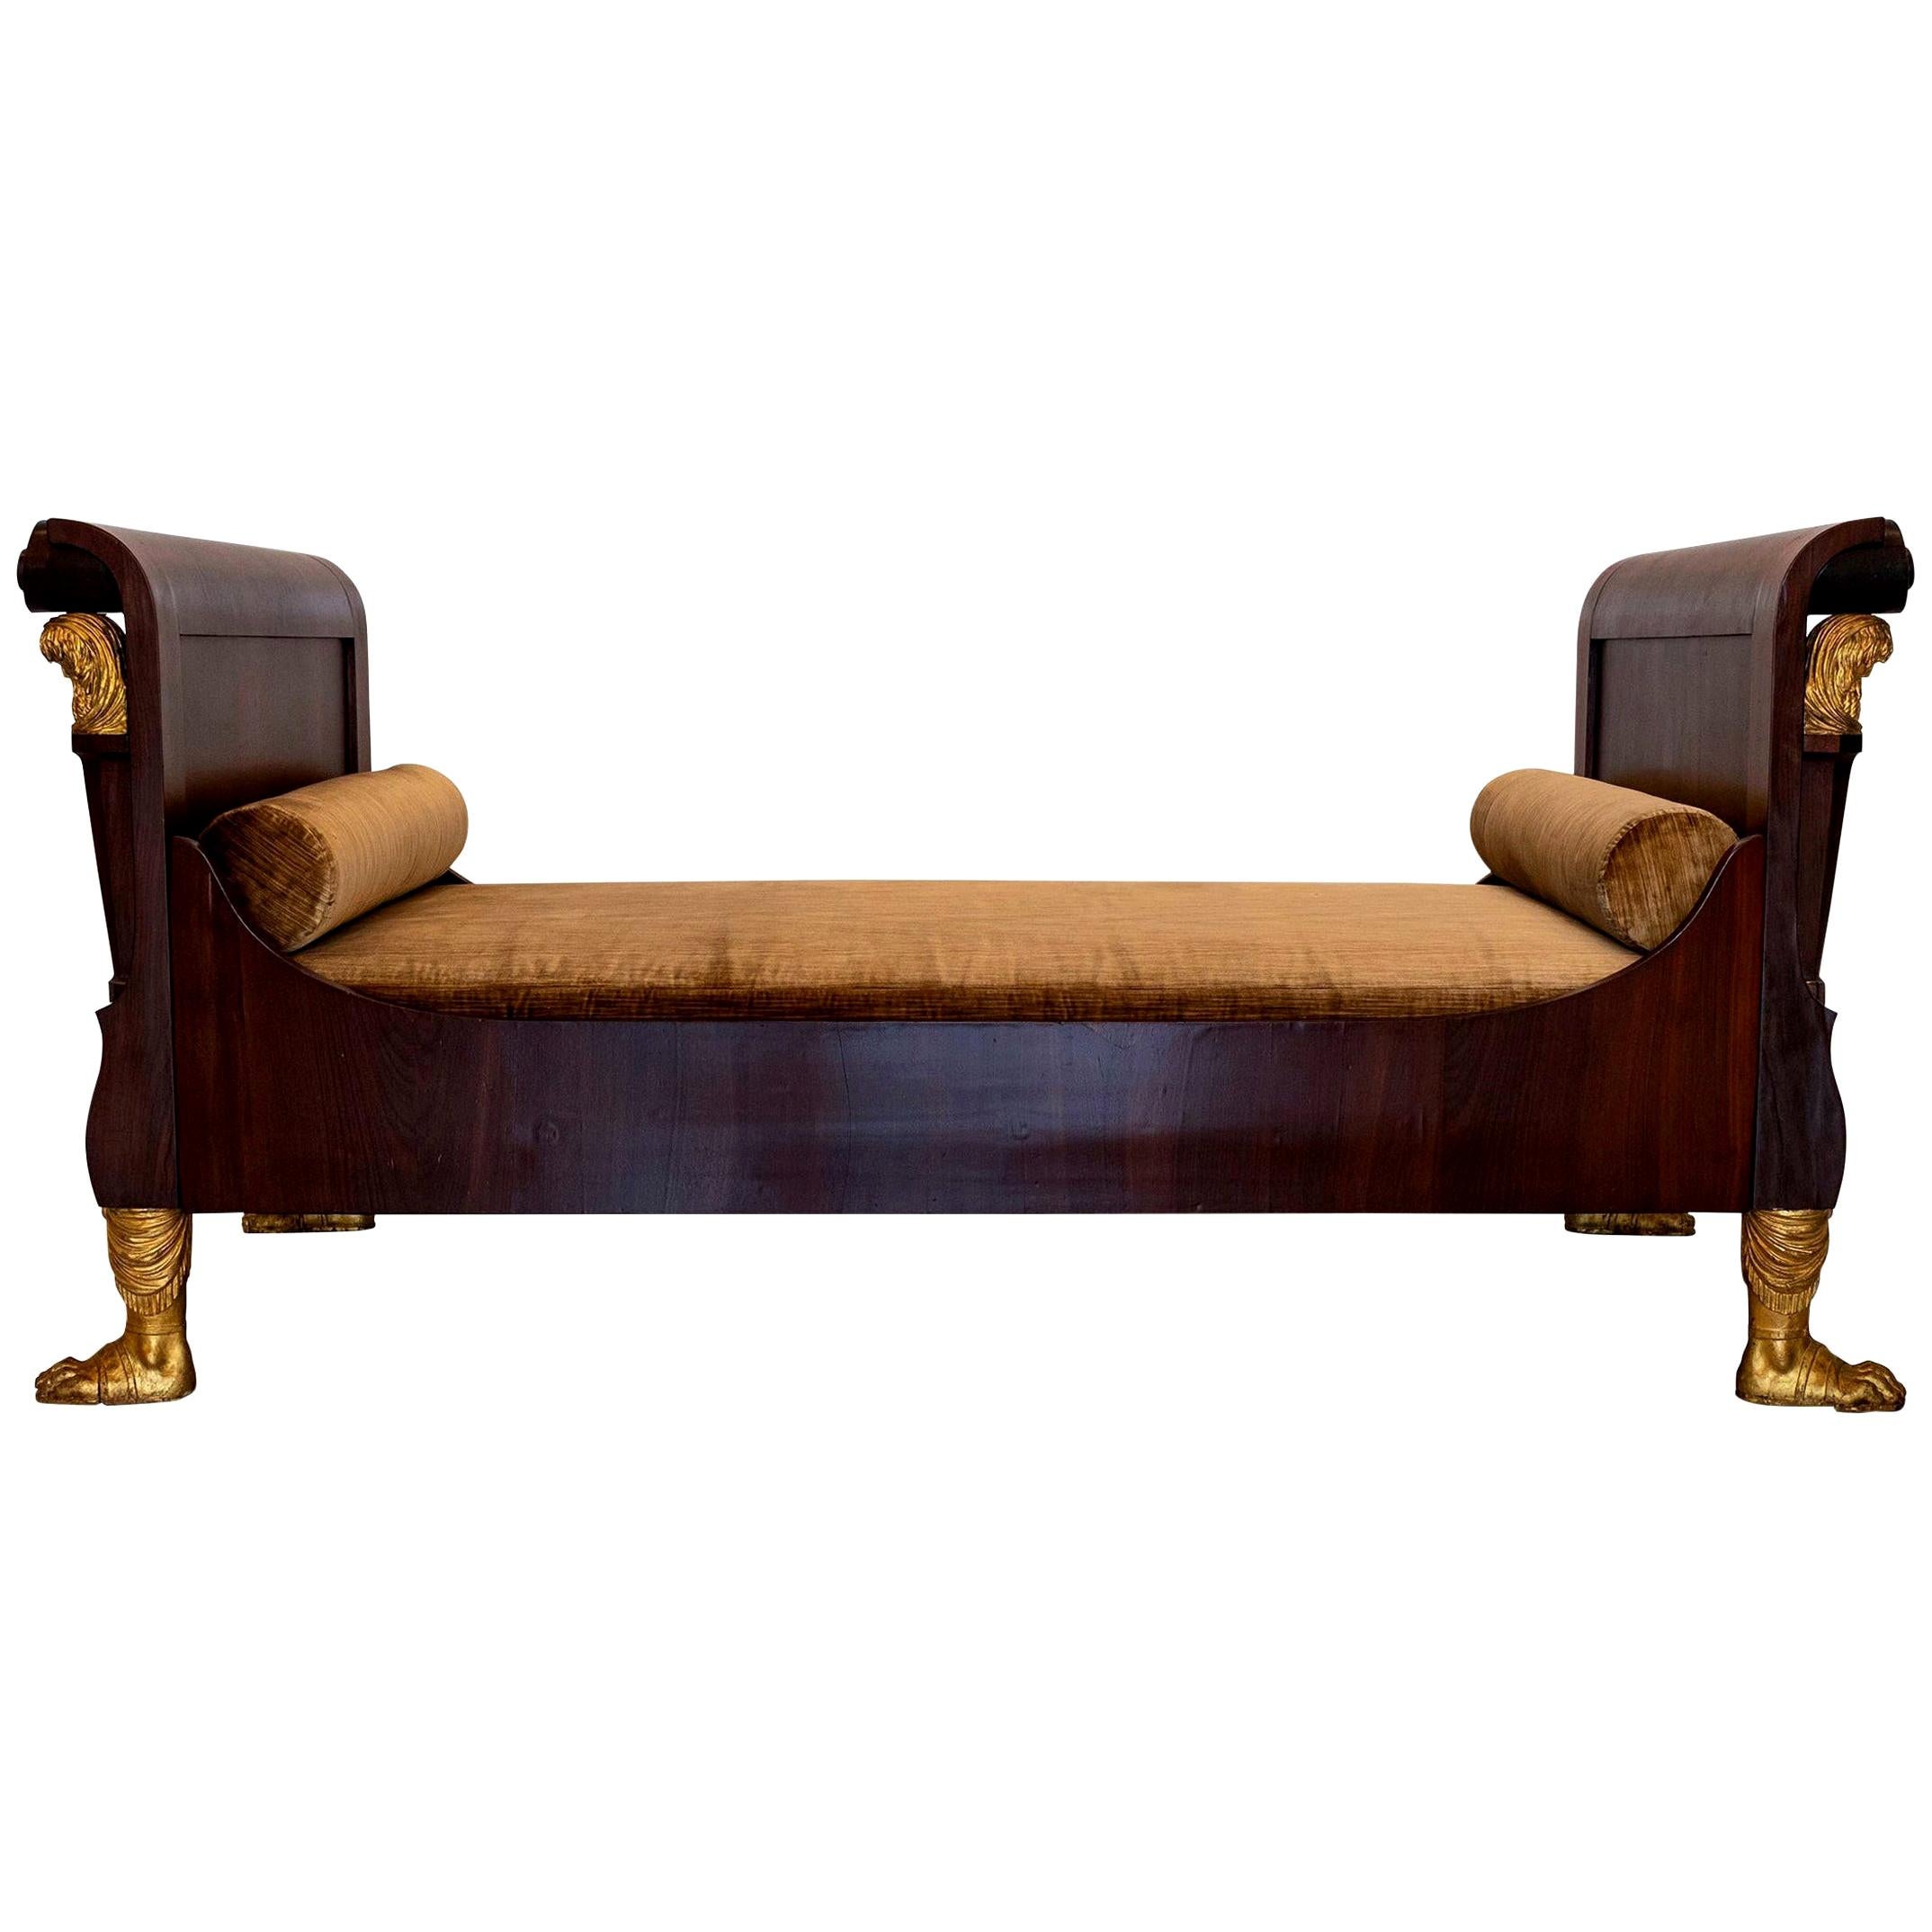 Early 19th Century French Empire Daybed